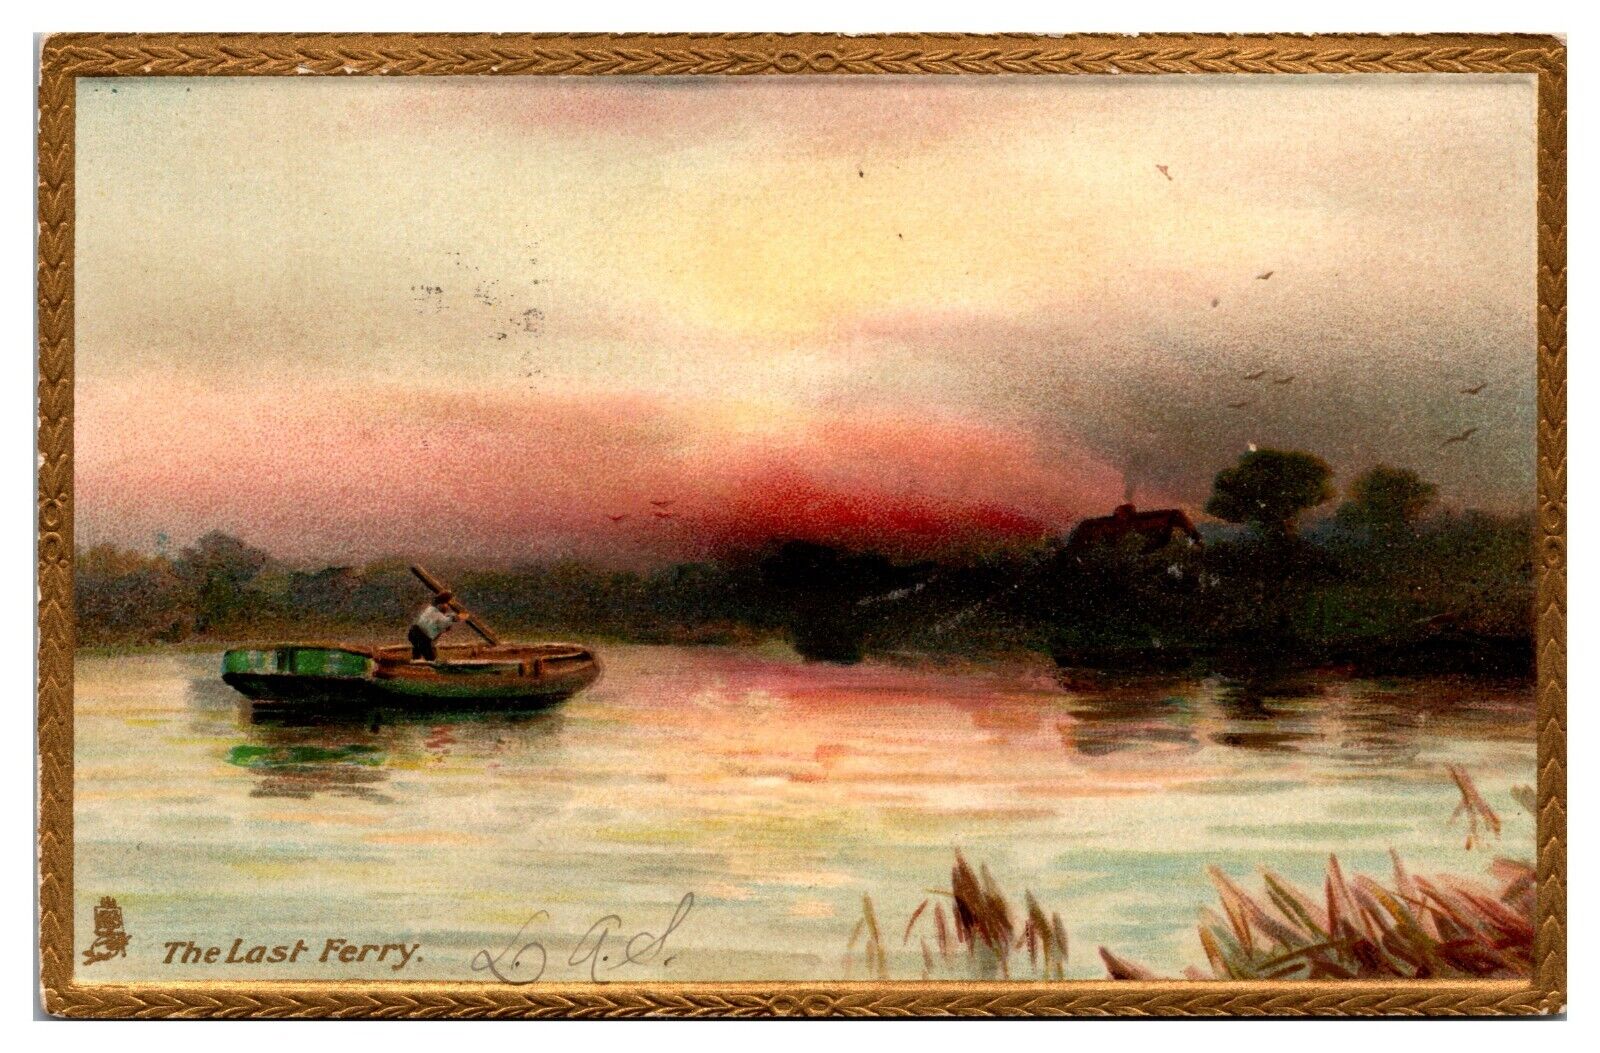 1907 The Last Ferry, Merry Christmas, Postmarked Royersford, PA Postcard